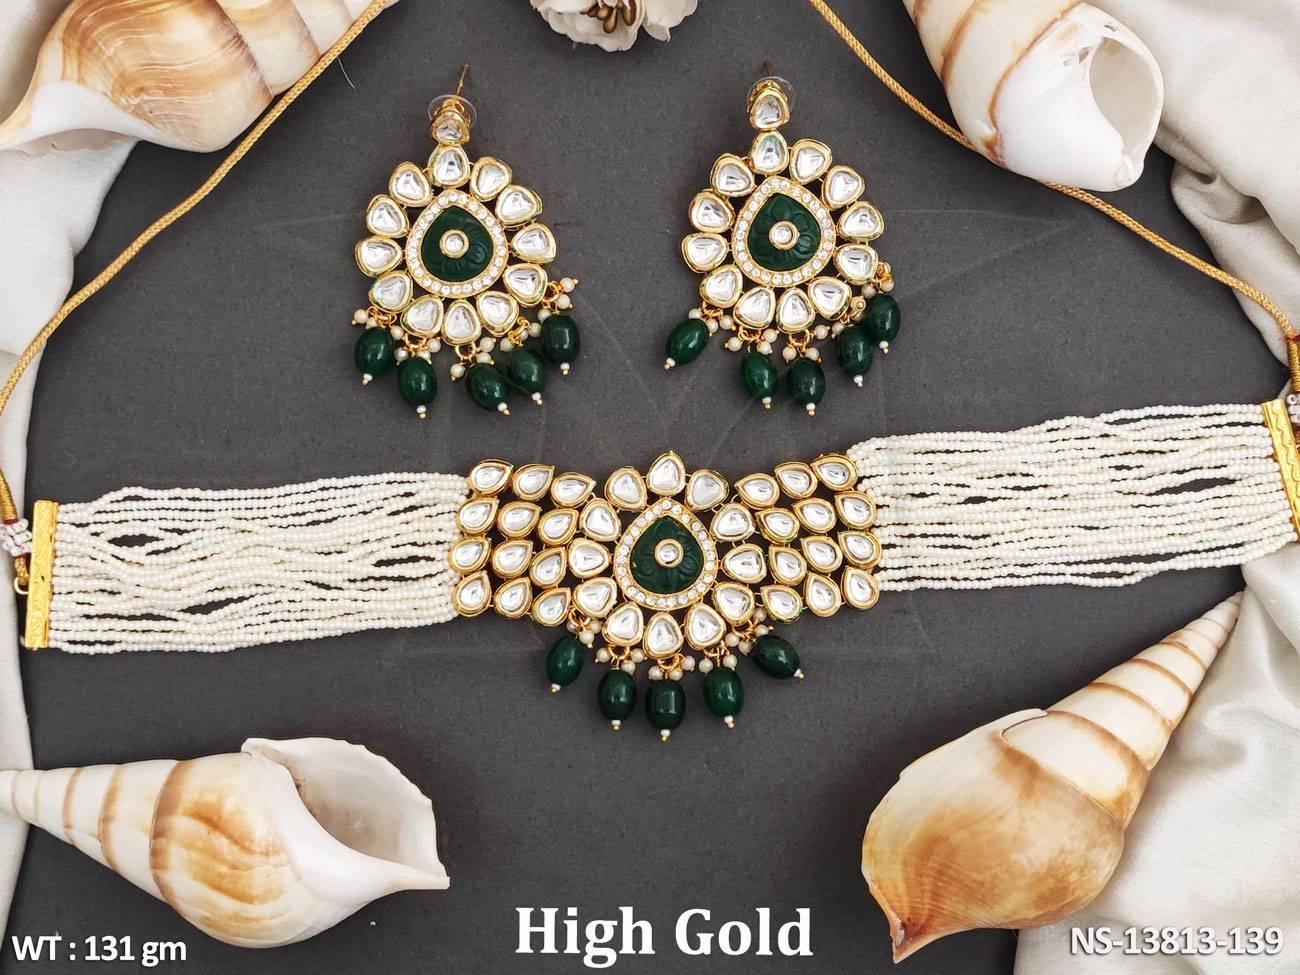 Introducing our Kundan choker necklace set, crafted with expert precision using high gold polish and Kundan stones.